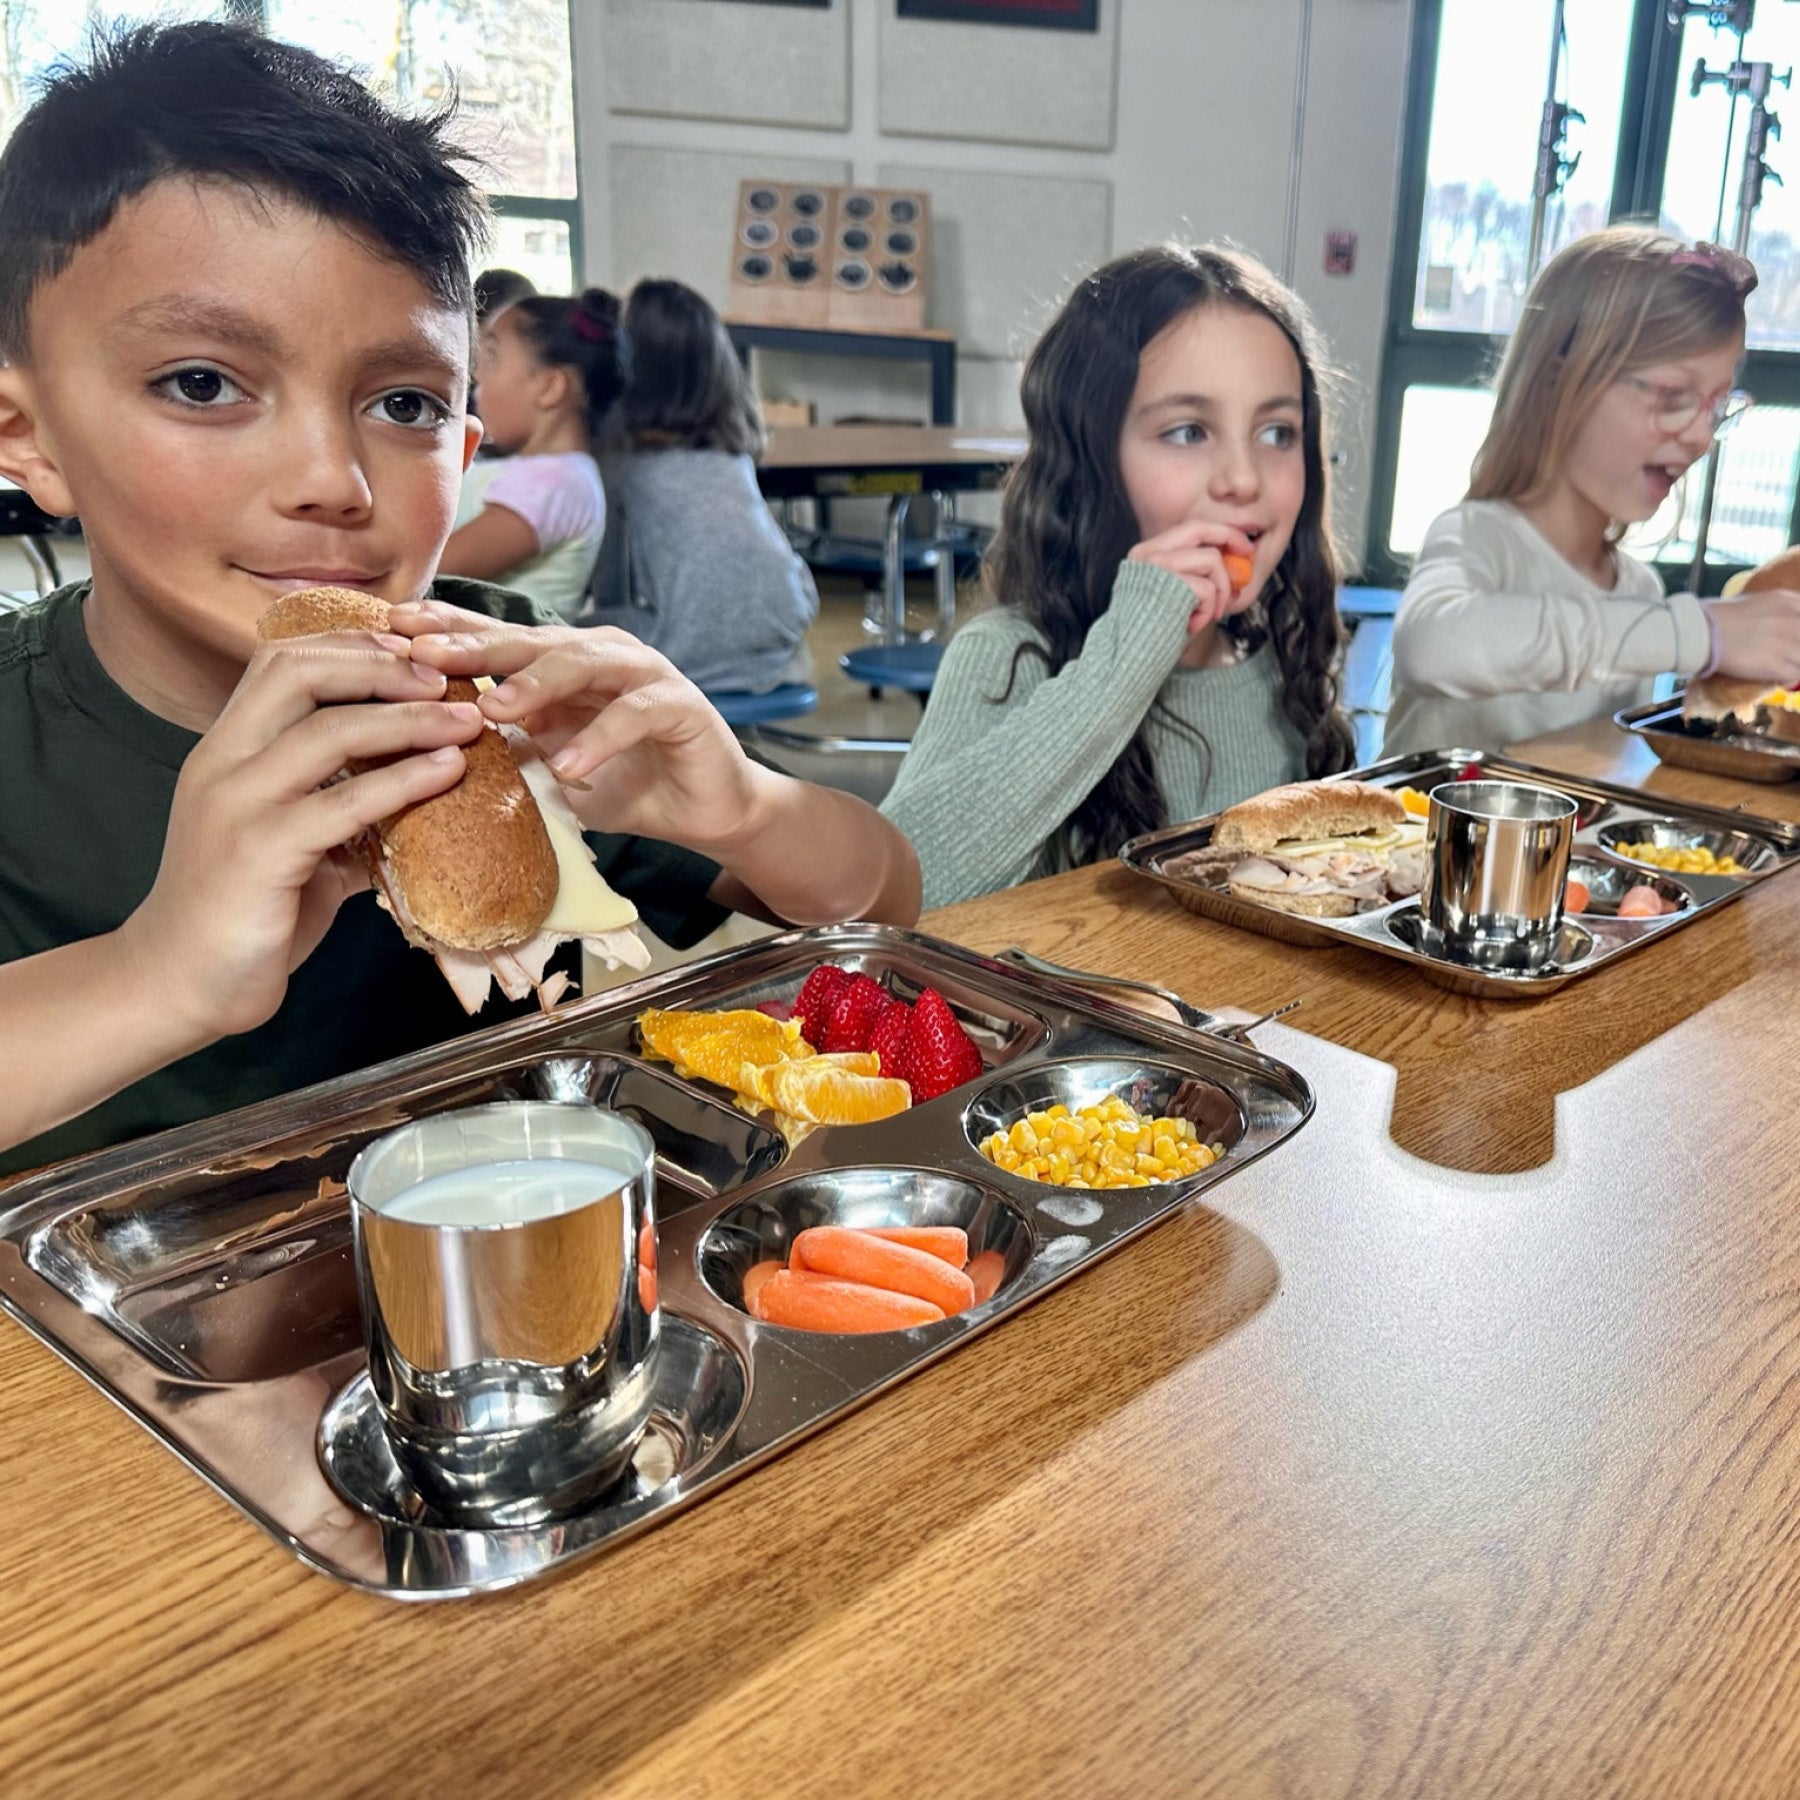 Two Minnetonka, MN middle schools transitioned from disposables to durable, metal utensils and saved approximately $6,000 in the first year. Over three years of use, the schools estimated a cost savings of $26,000 dropping the annual per student cost for foodware from $6.95 for disposables to $2.56 for reusables.